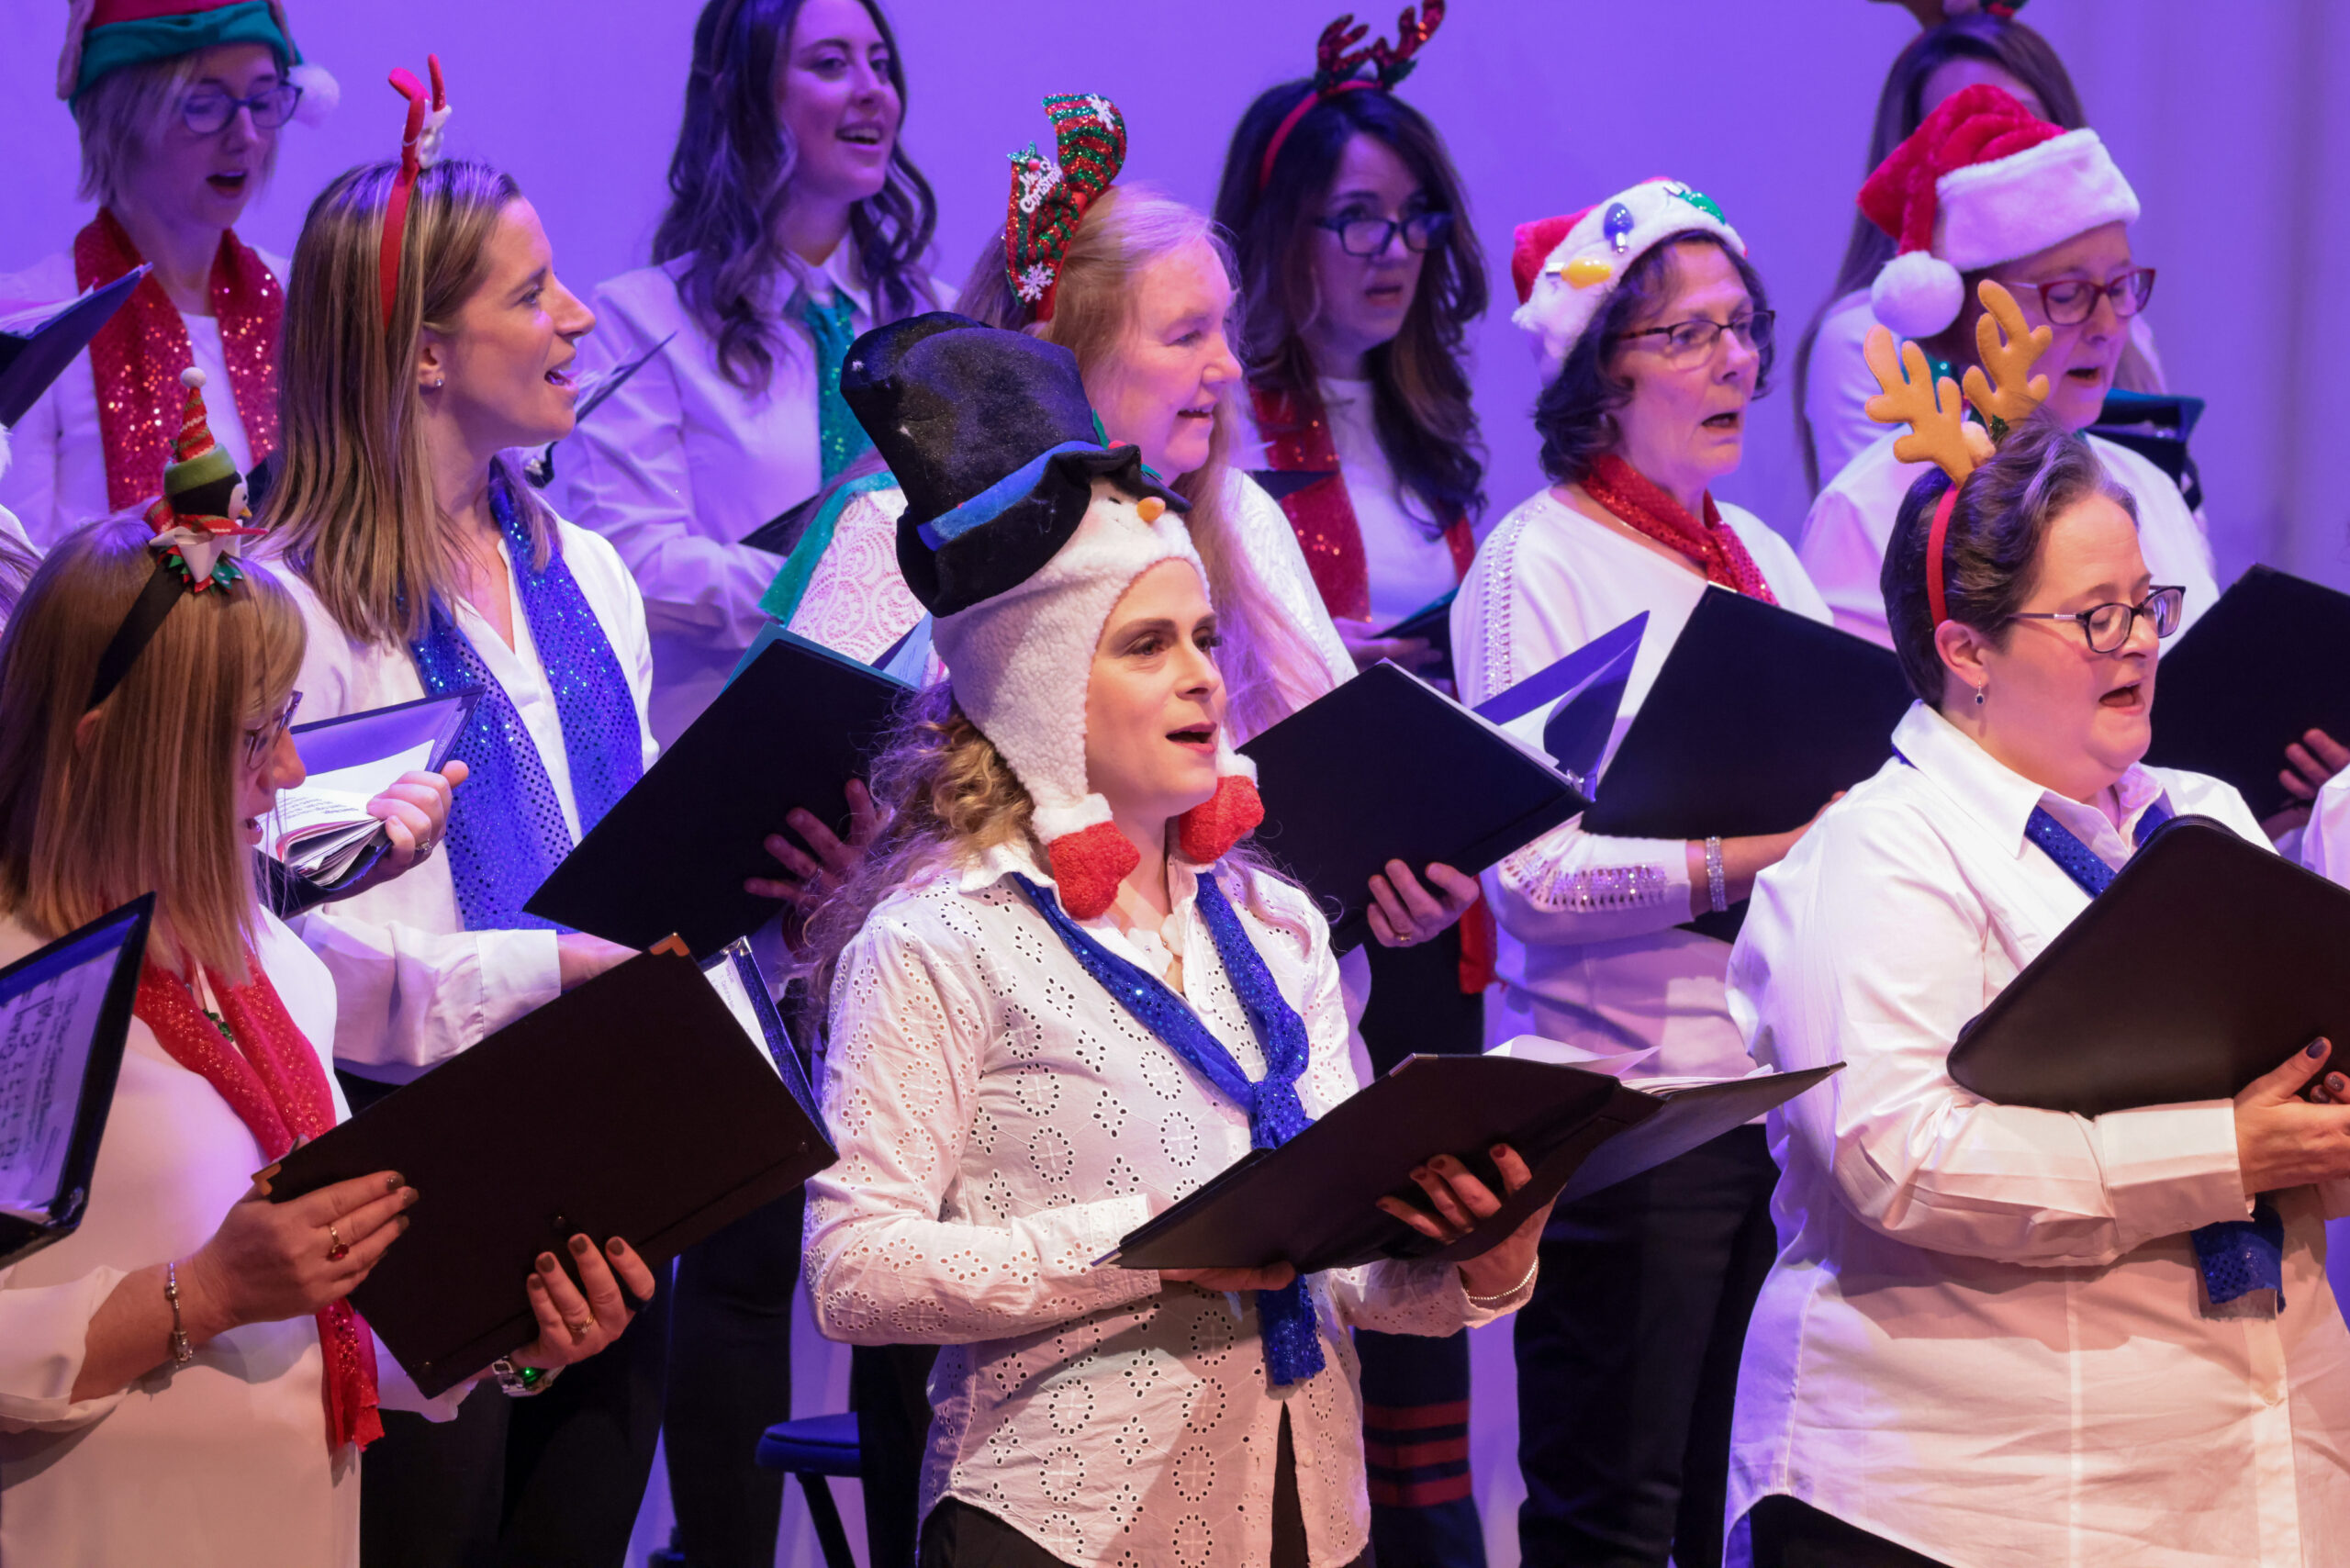 Photos: Treblemakers holiday concert